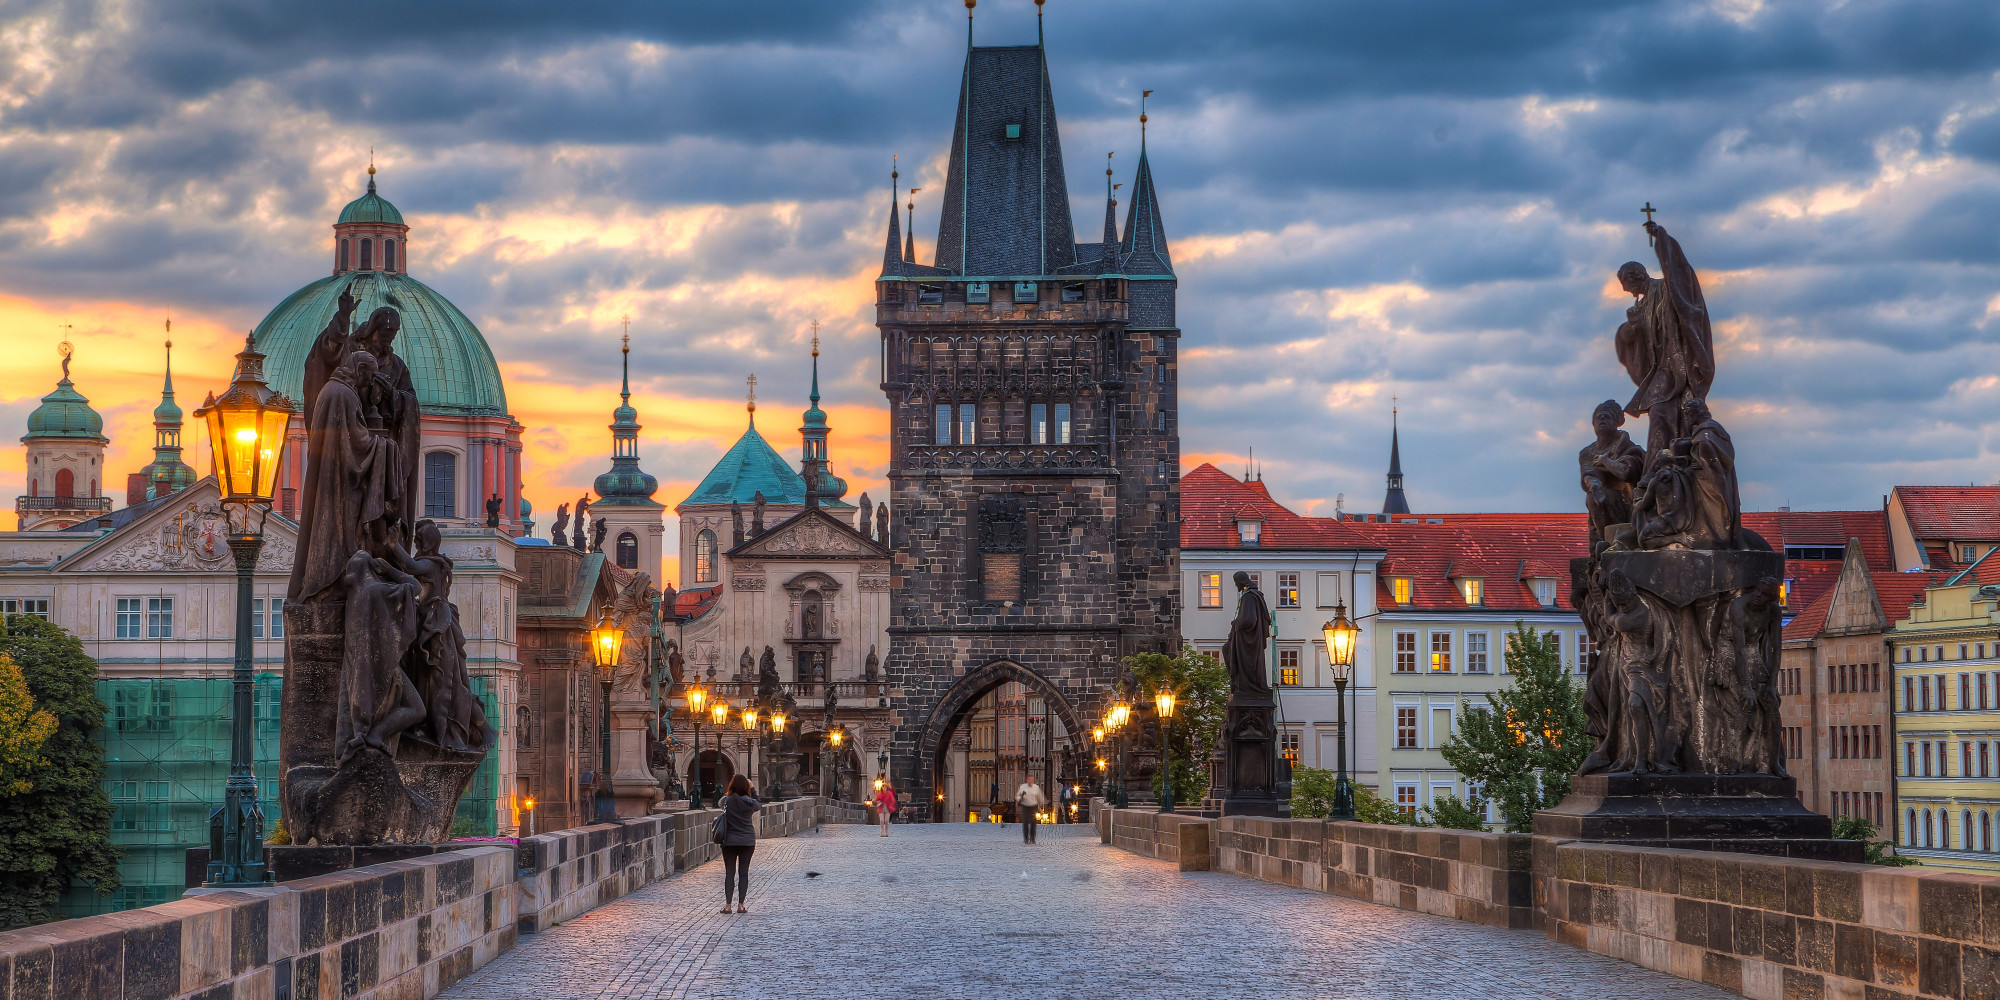 10 Dazzling Photos That Are Proof Prague Is Europe's Prettiest City